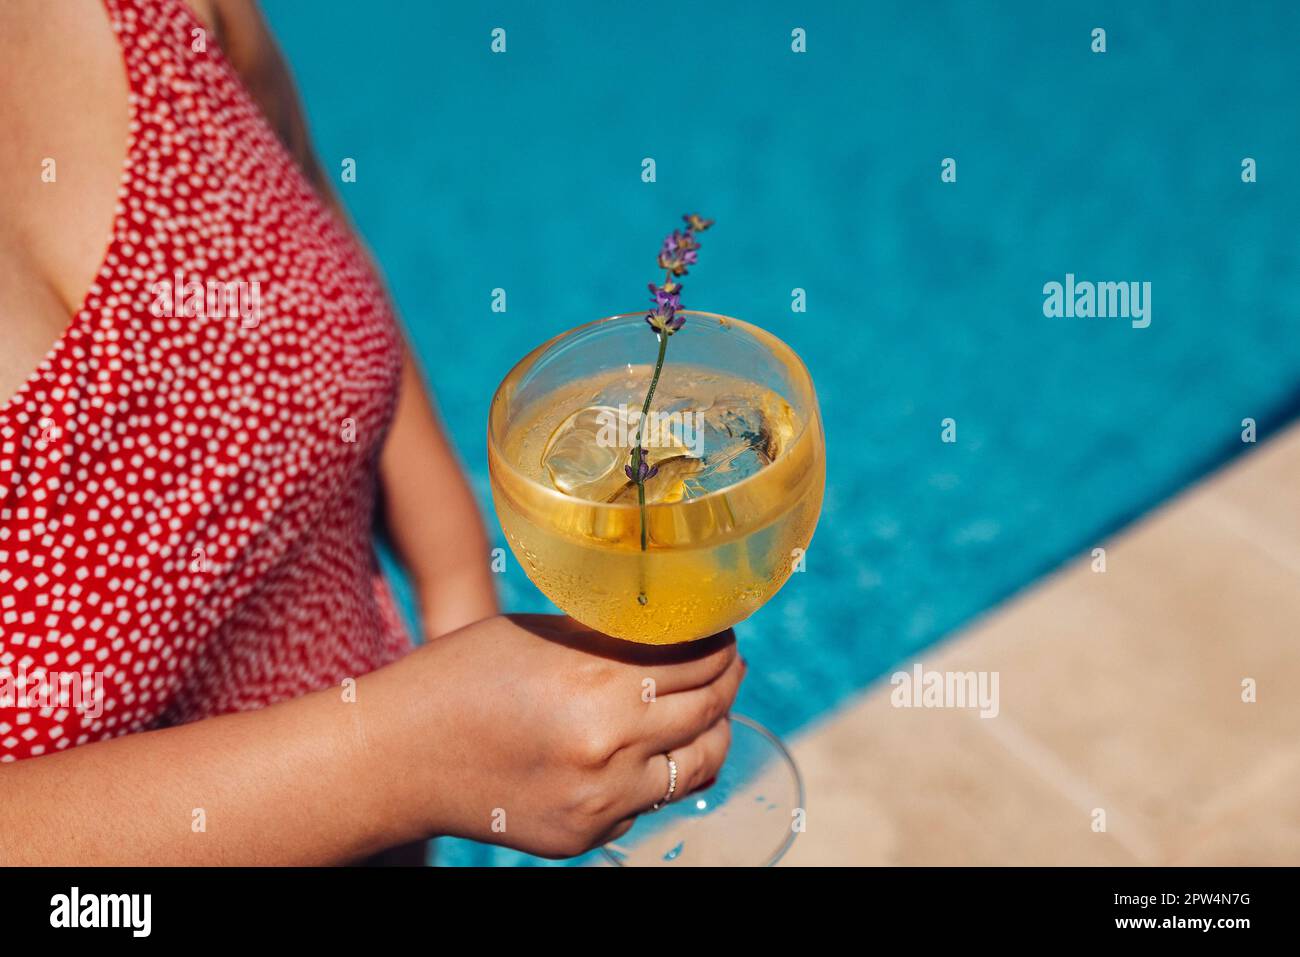 Young woman hand with red manicure holds a glass of champagne. Wine cocktail with lemon wedges. Sunny day and reflection of rays in blue water on Stock Photo